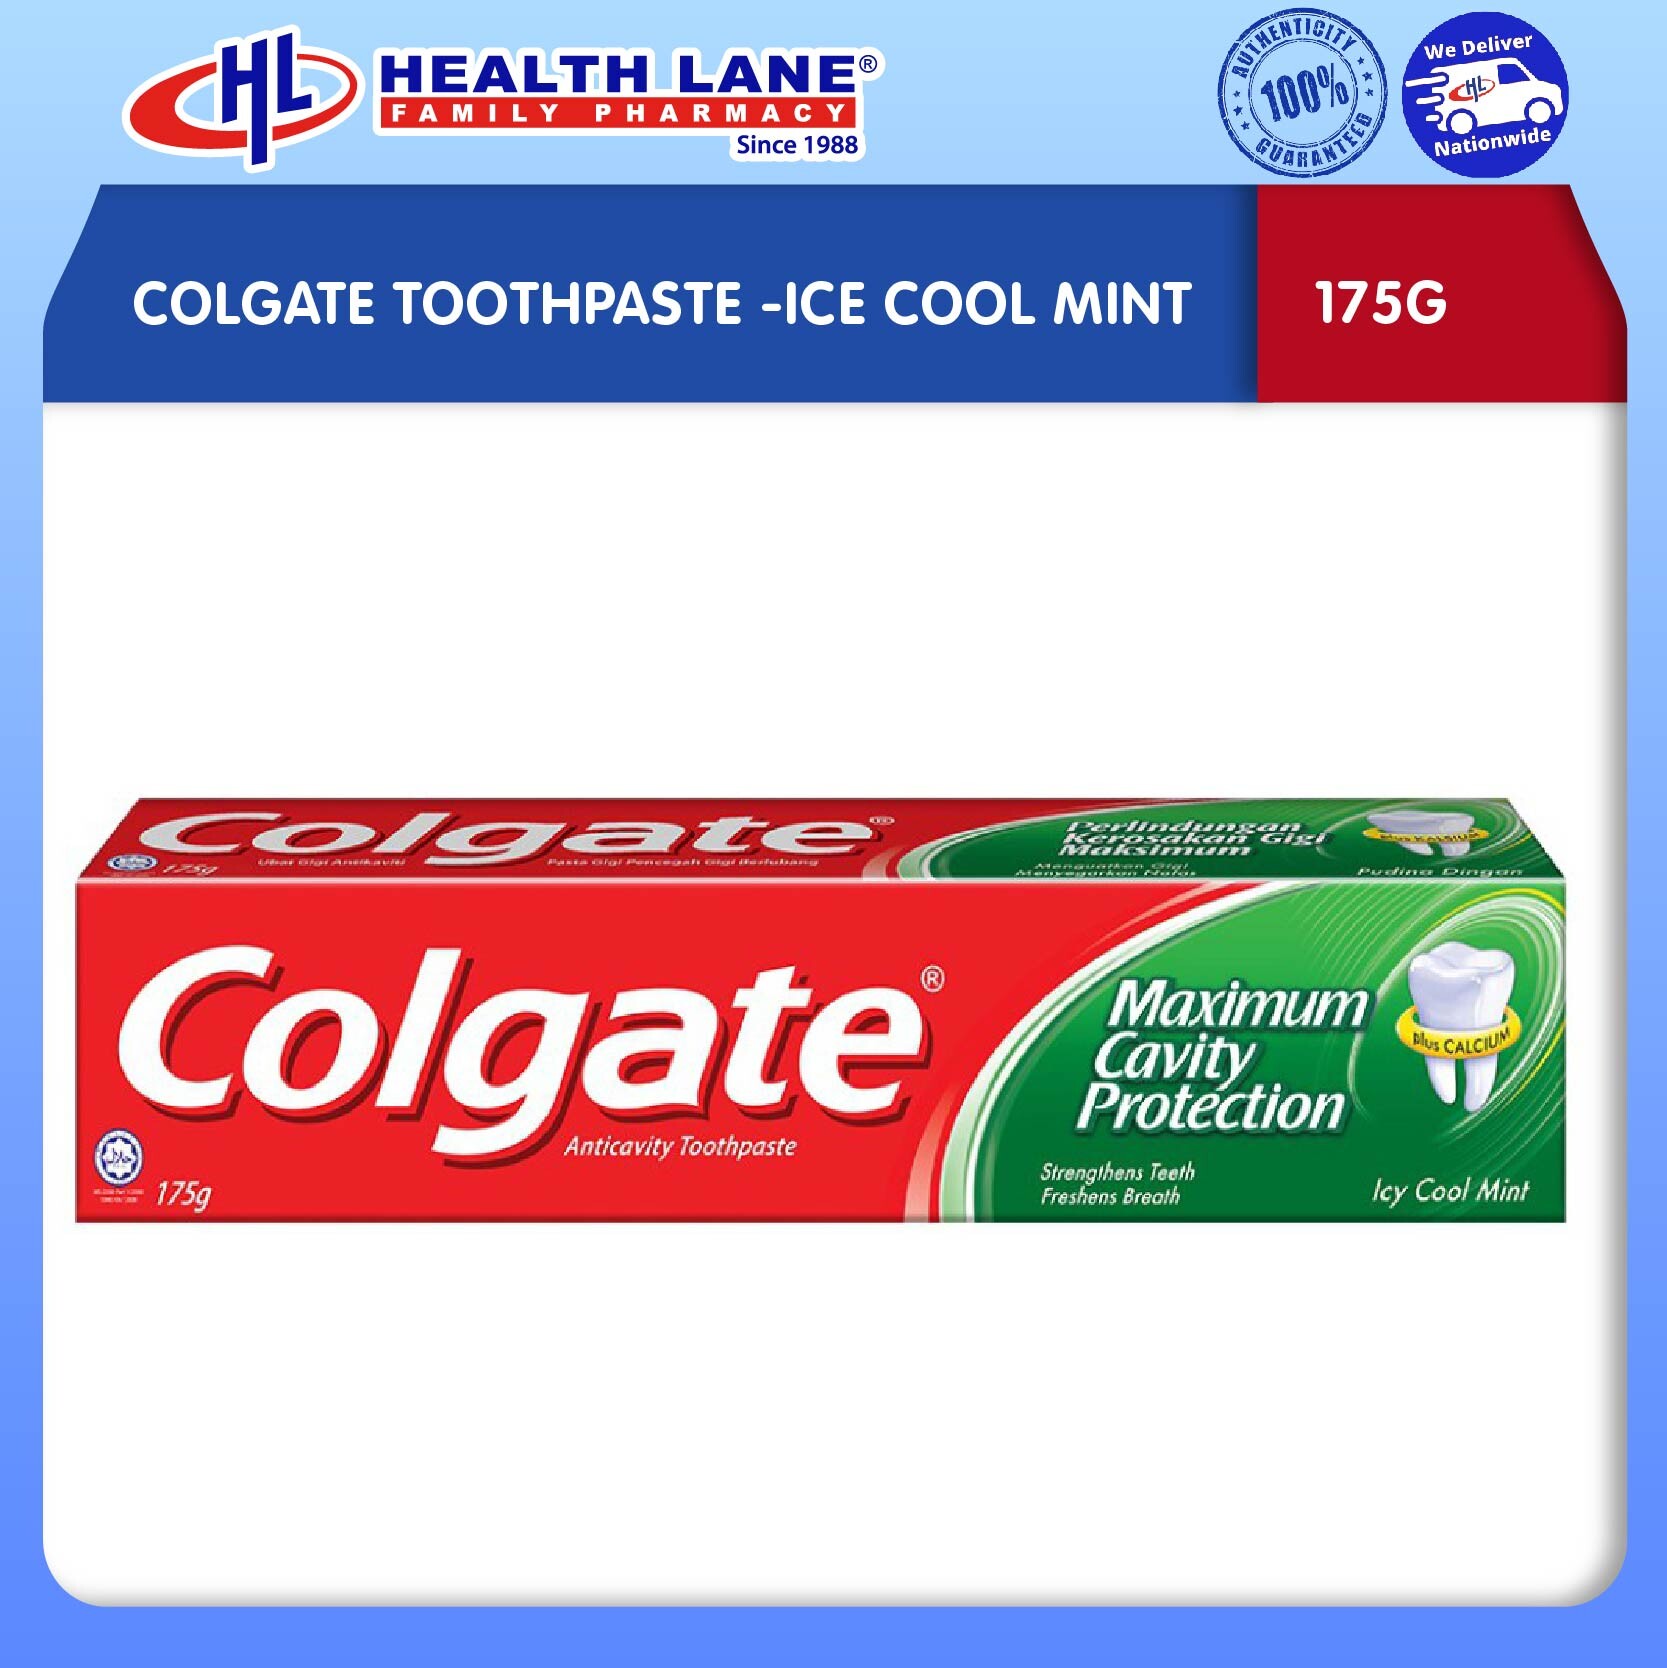 COLGATE TOOTHPASTE -ICE COOL MINT (175G)